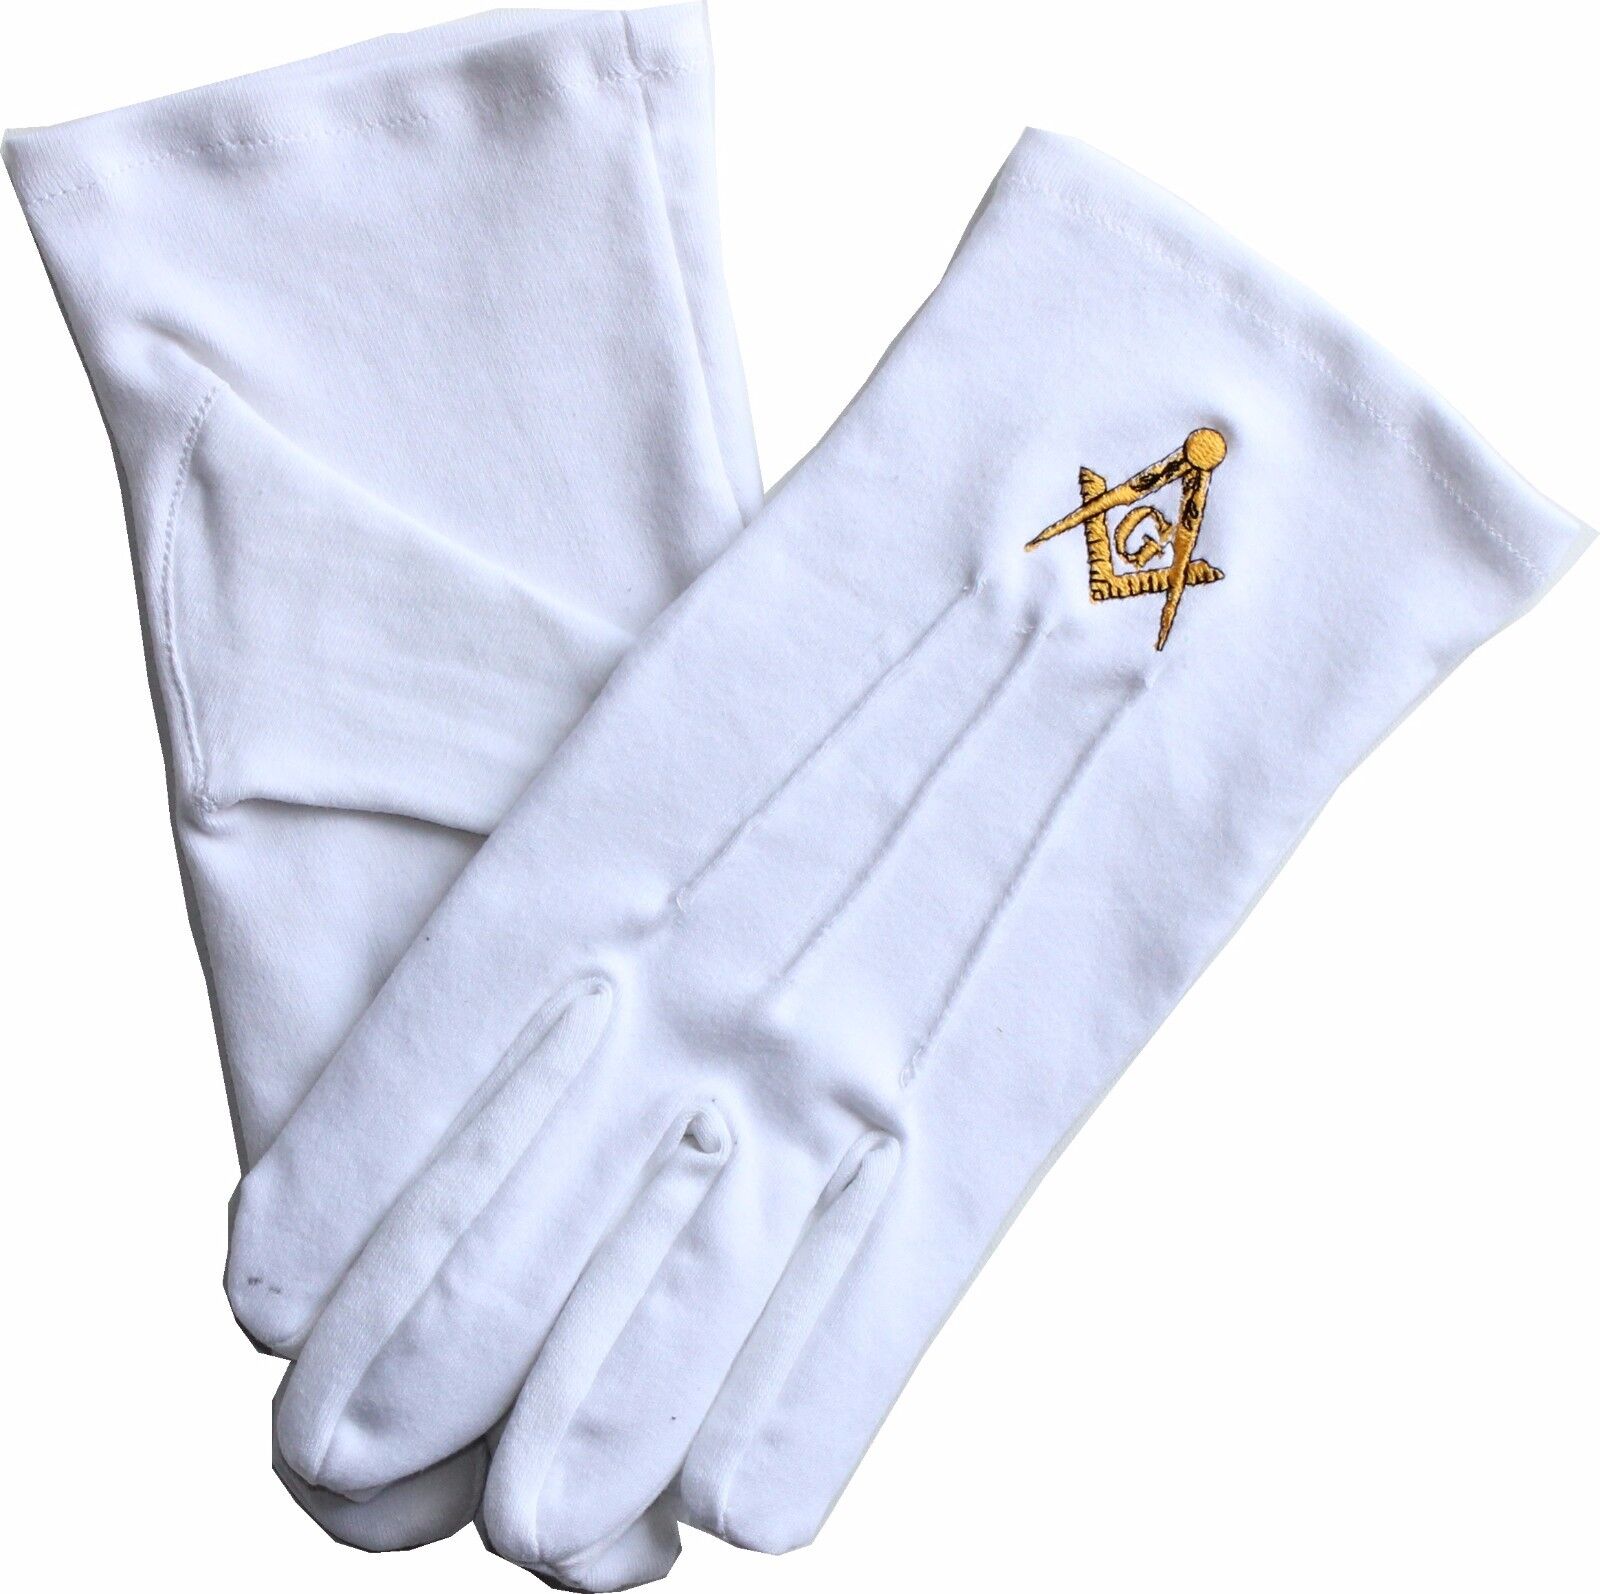 MASONIC FREEMASONS SQUARE AND COMPASS EMBROIDERED DRESS GLOVES XL SIZE